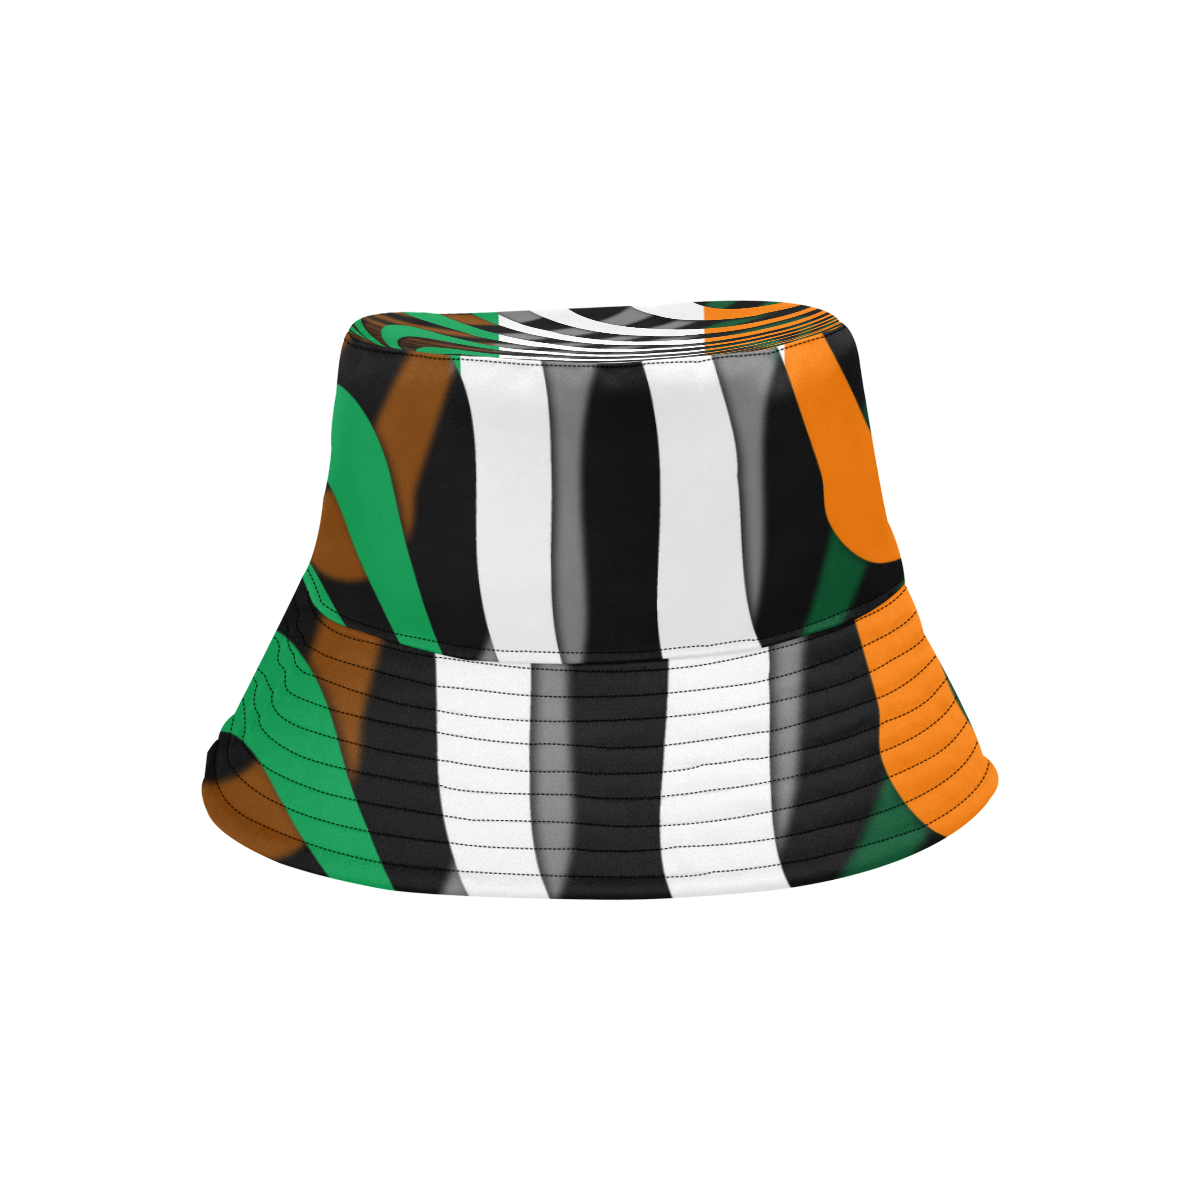 The Flag of Ireland All Over Print Bucket Hat